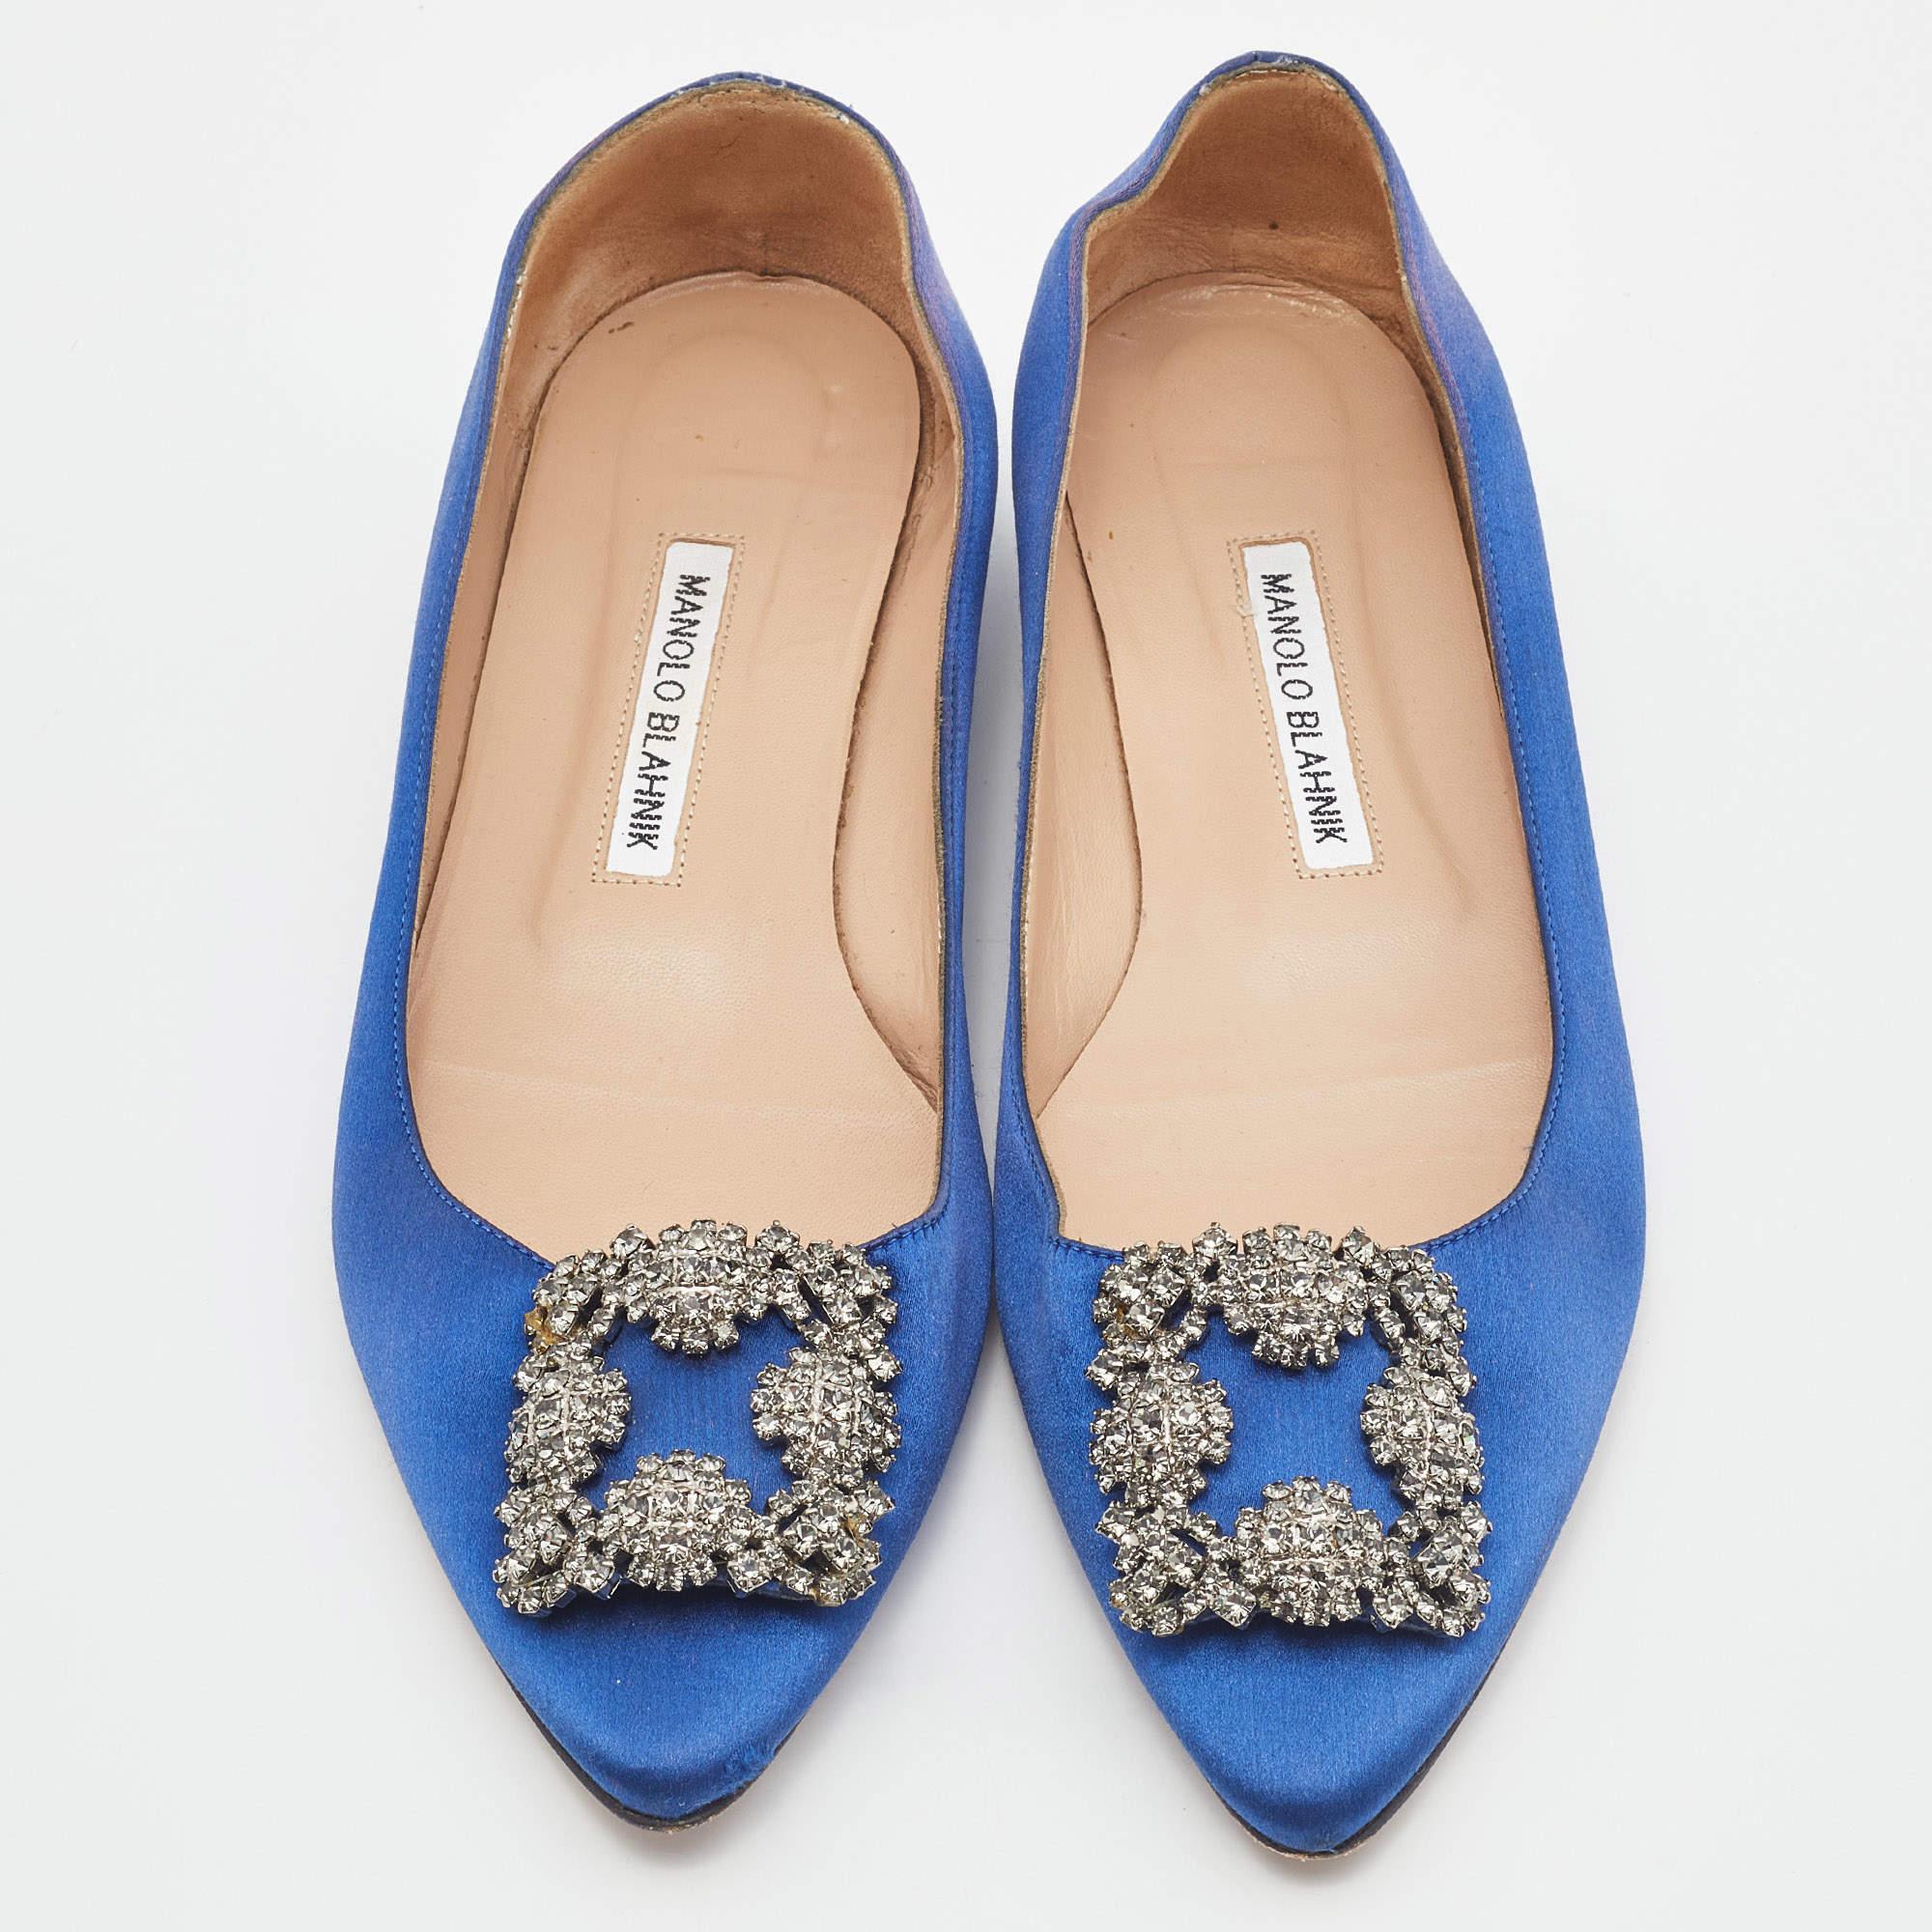 You know you are going to have a glamorous day the moment you put these ballet flats on. They are a Manolo Blahnik creation, meticulously crafted from satin and lined with leather on the insoles. The pair carries a classic blue hue and embellishment